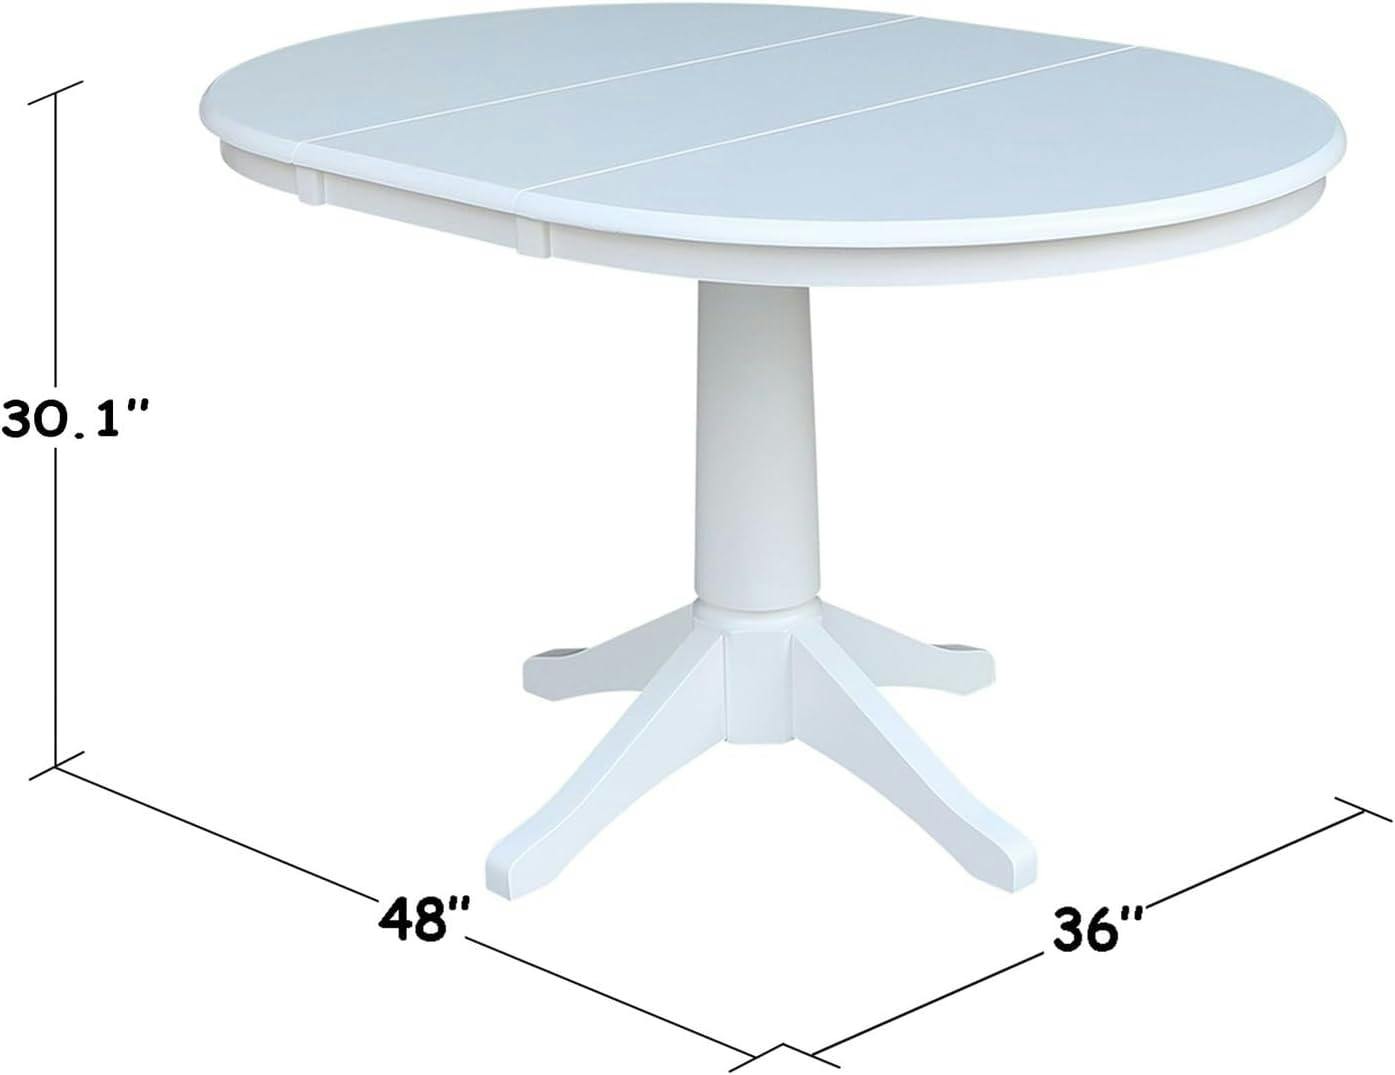 Elegant French Country 36" Round White Wood Extendable Dining Table